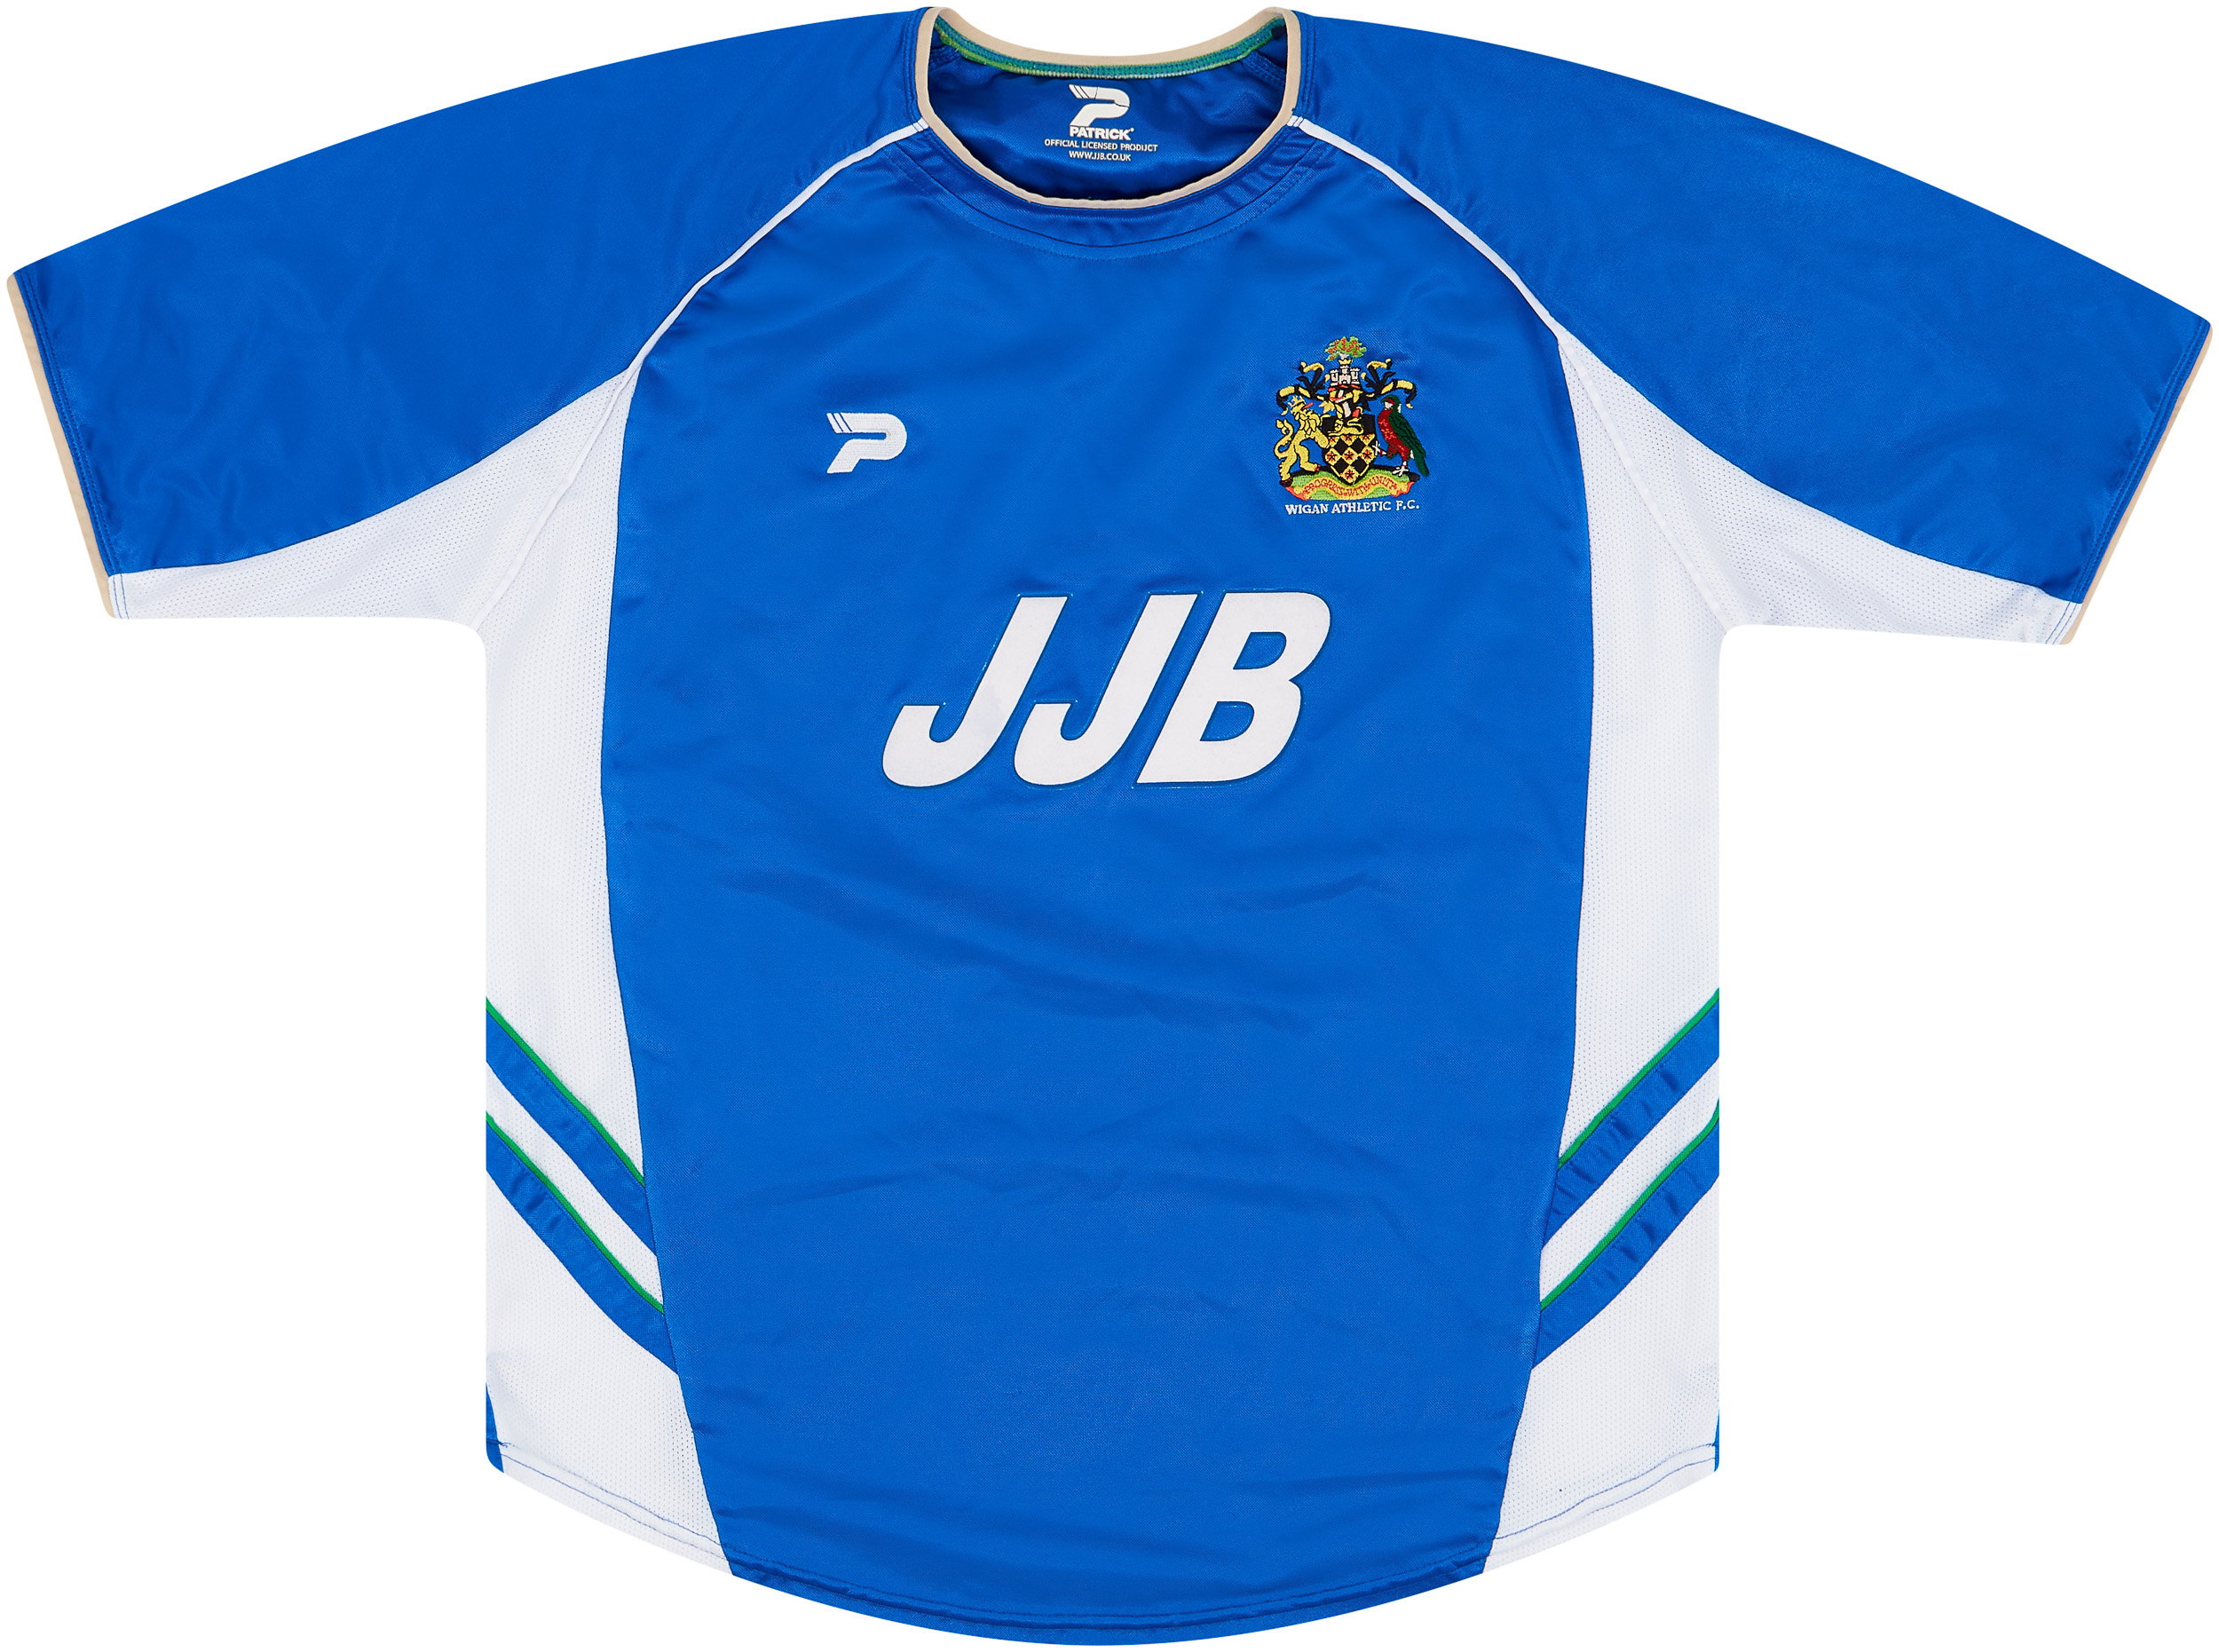 2002-03 Wigan Athletic Home Shirt - 5/10 - ()